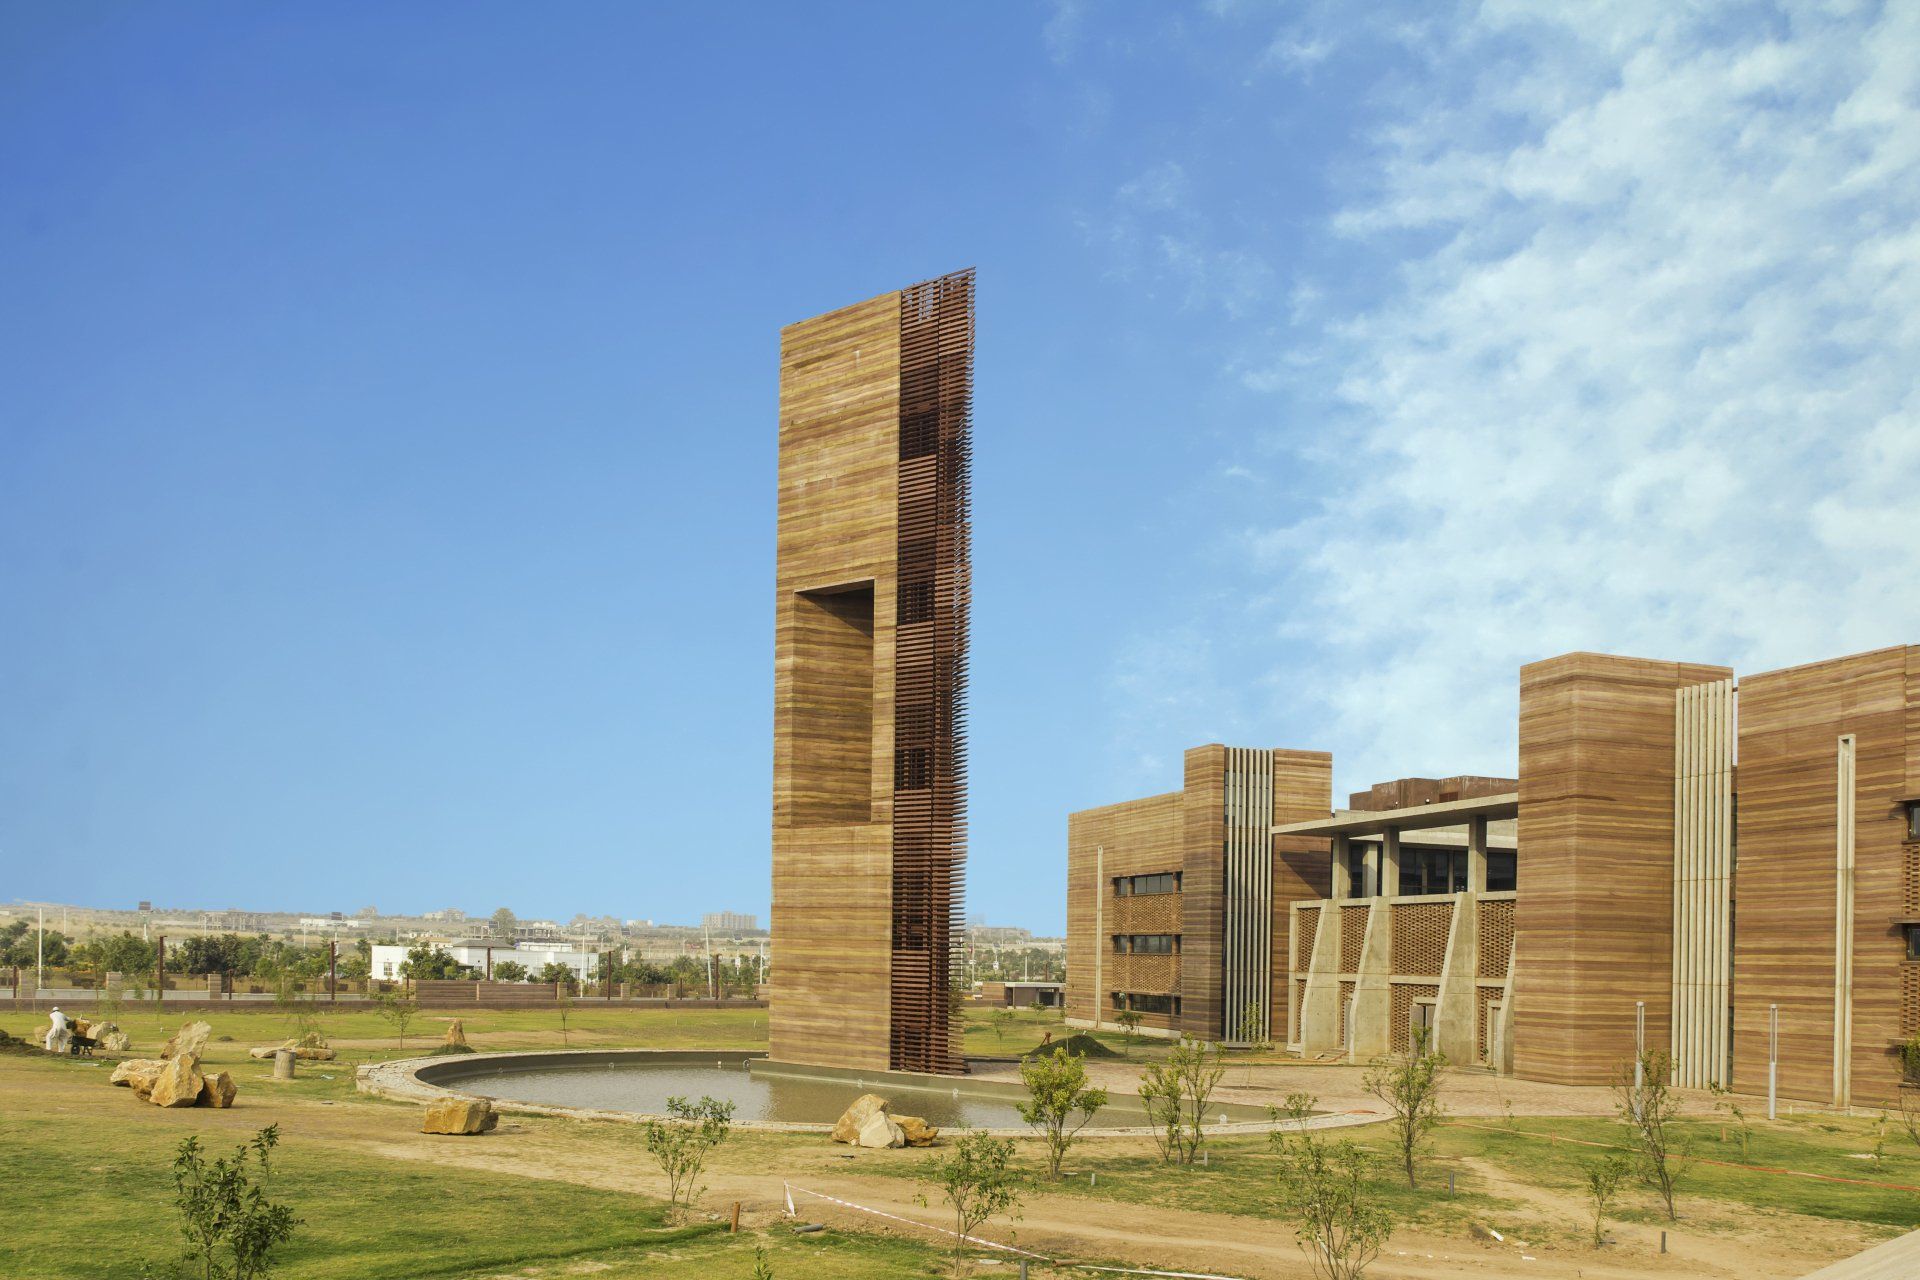 largest rammed earth tower in the world next to commercial Telenor Head office building